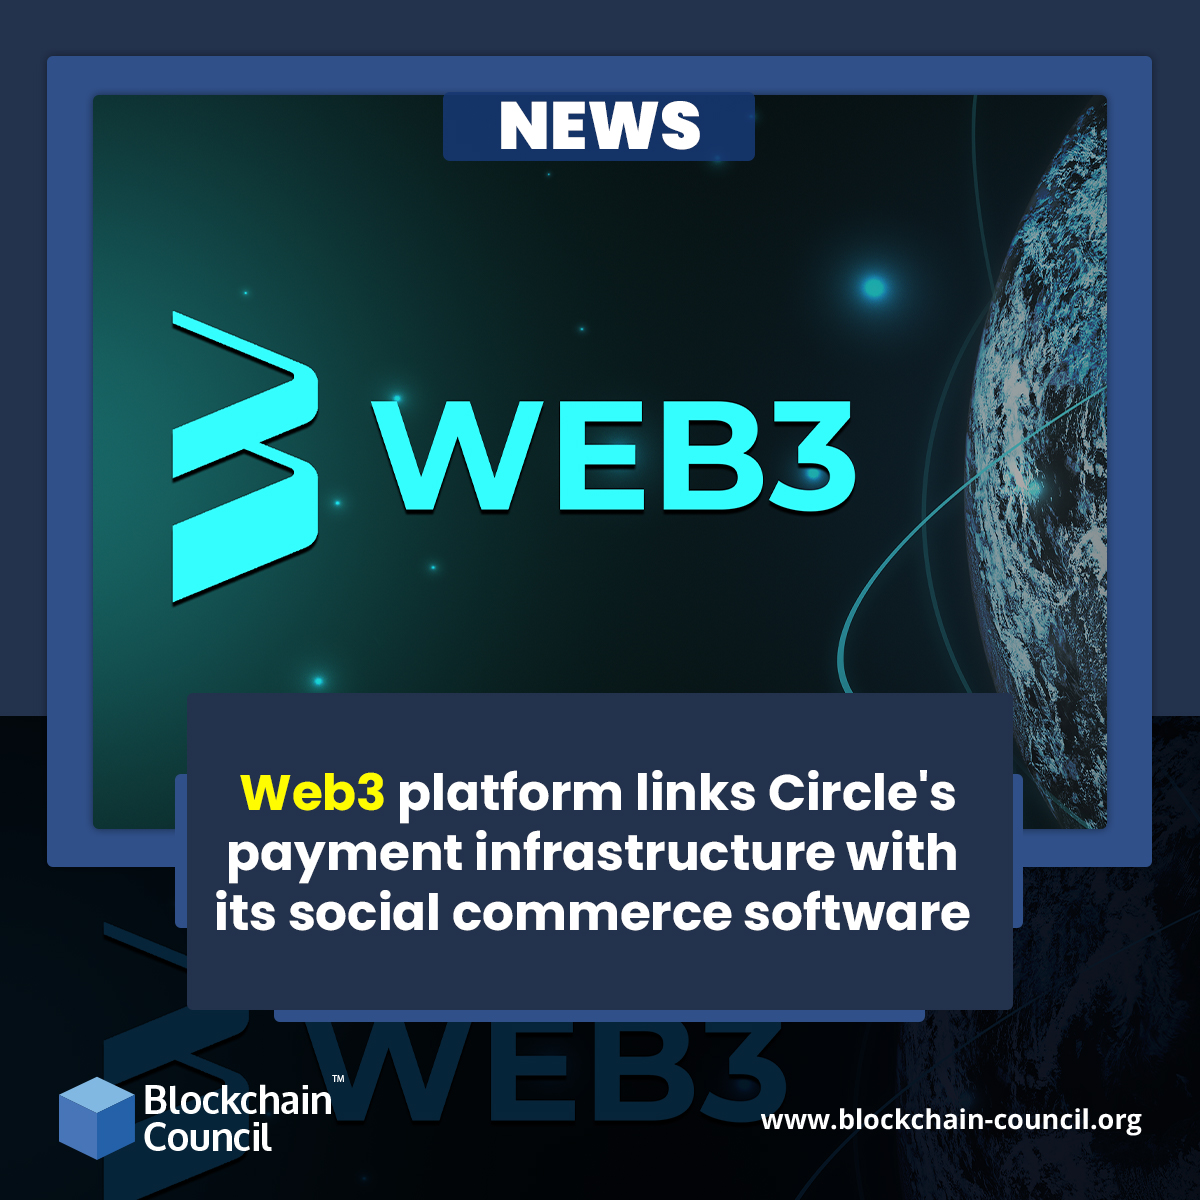 Web3 platform links Circle's payment infrastructure with its social commerce software